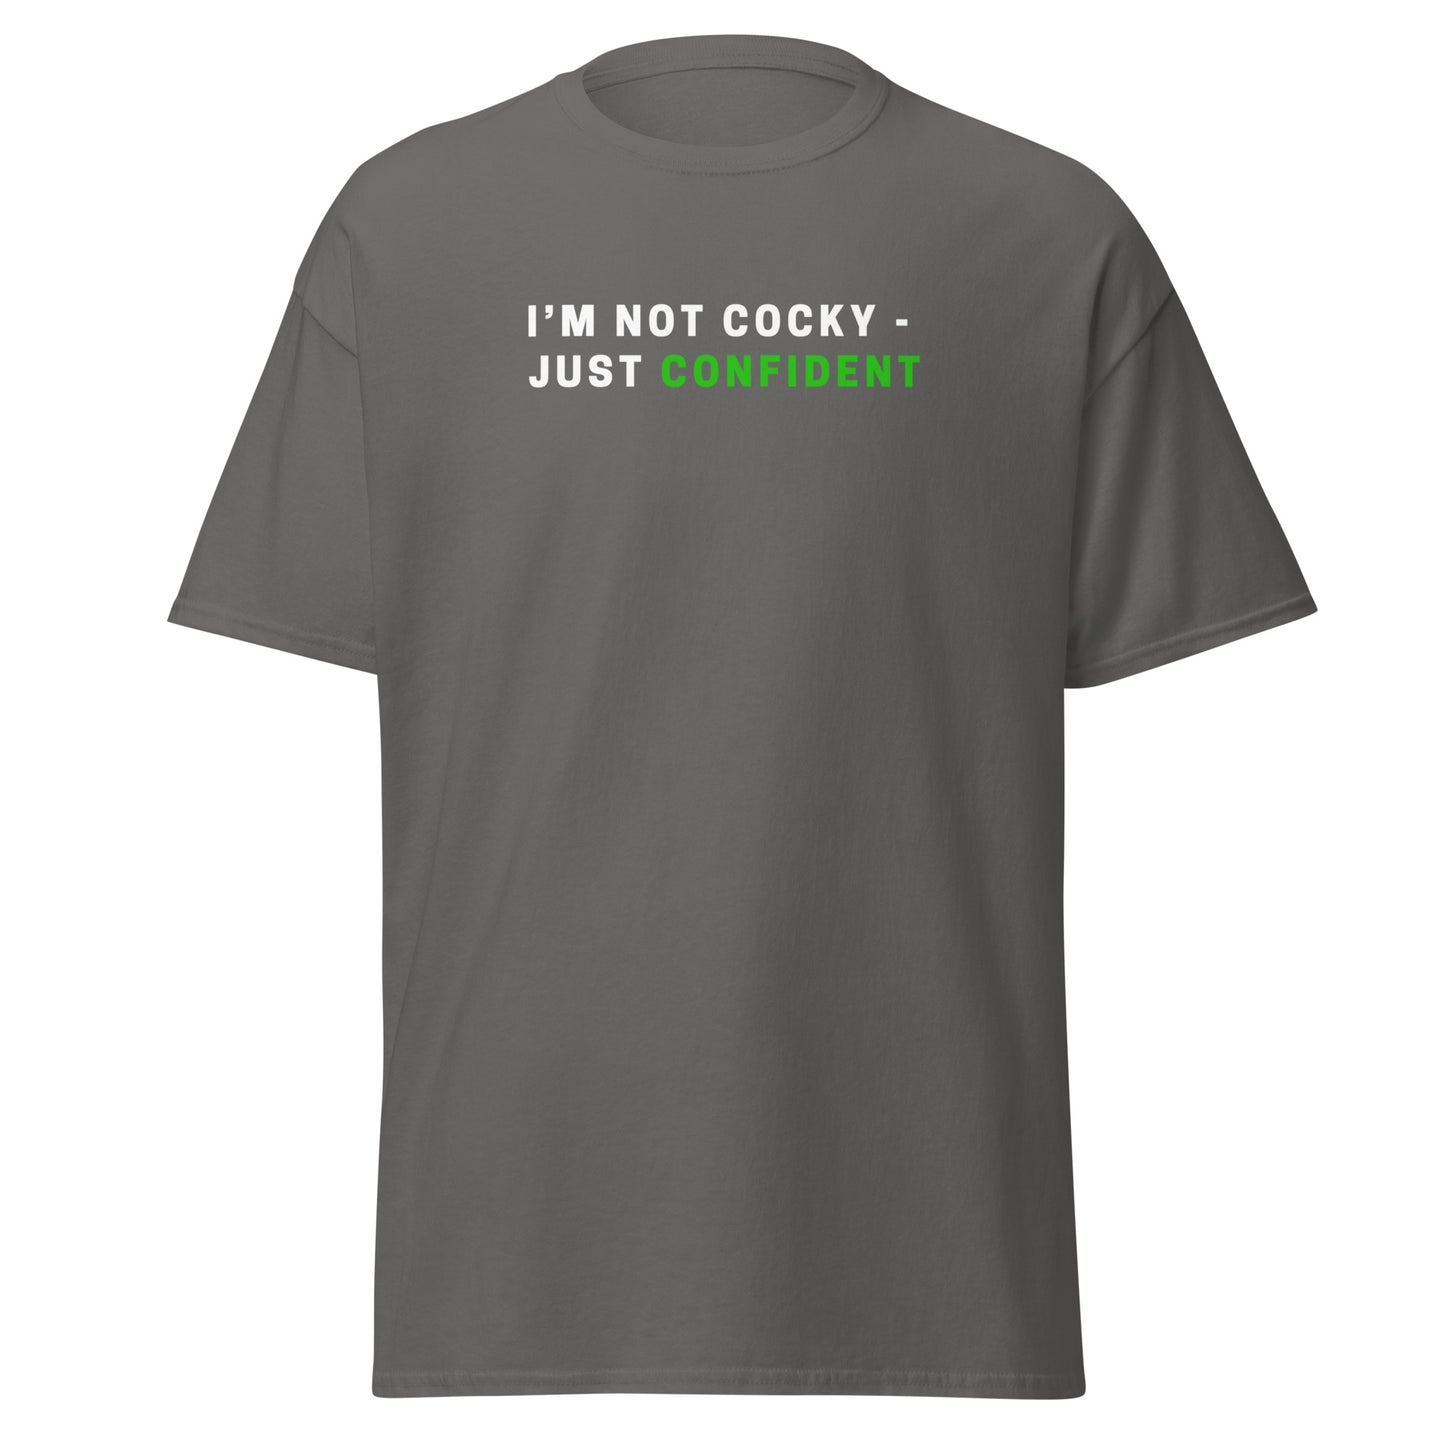 I’m not cocky tee